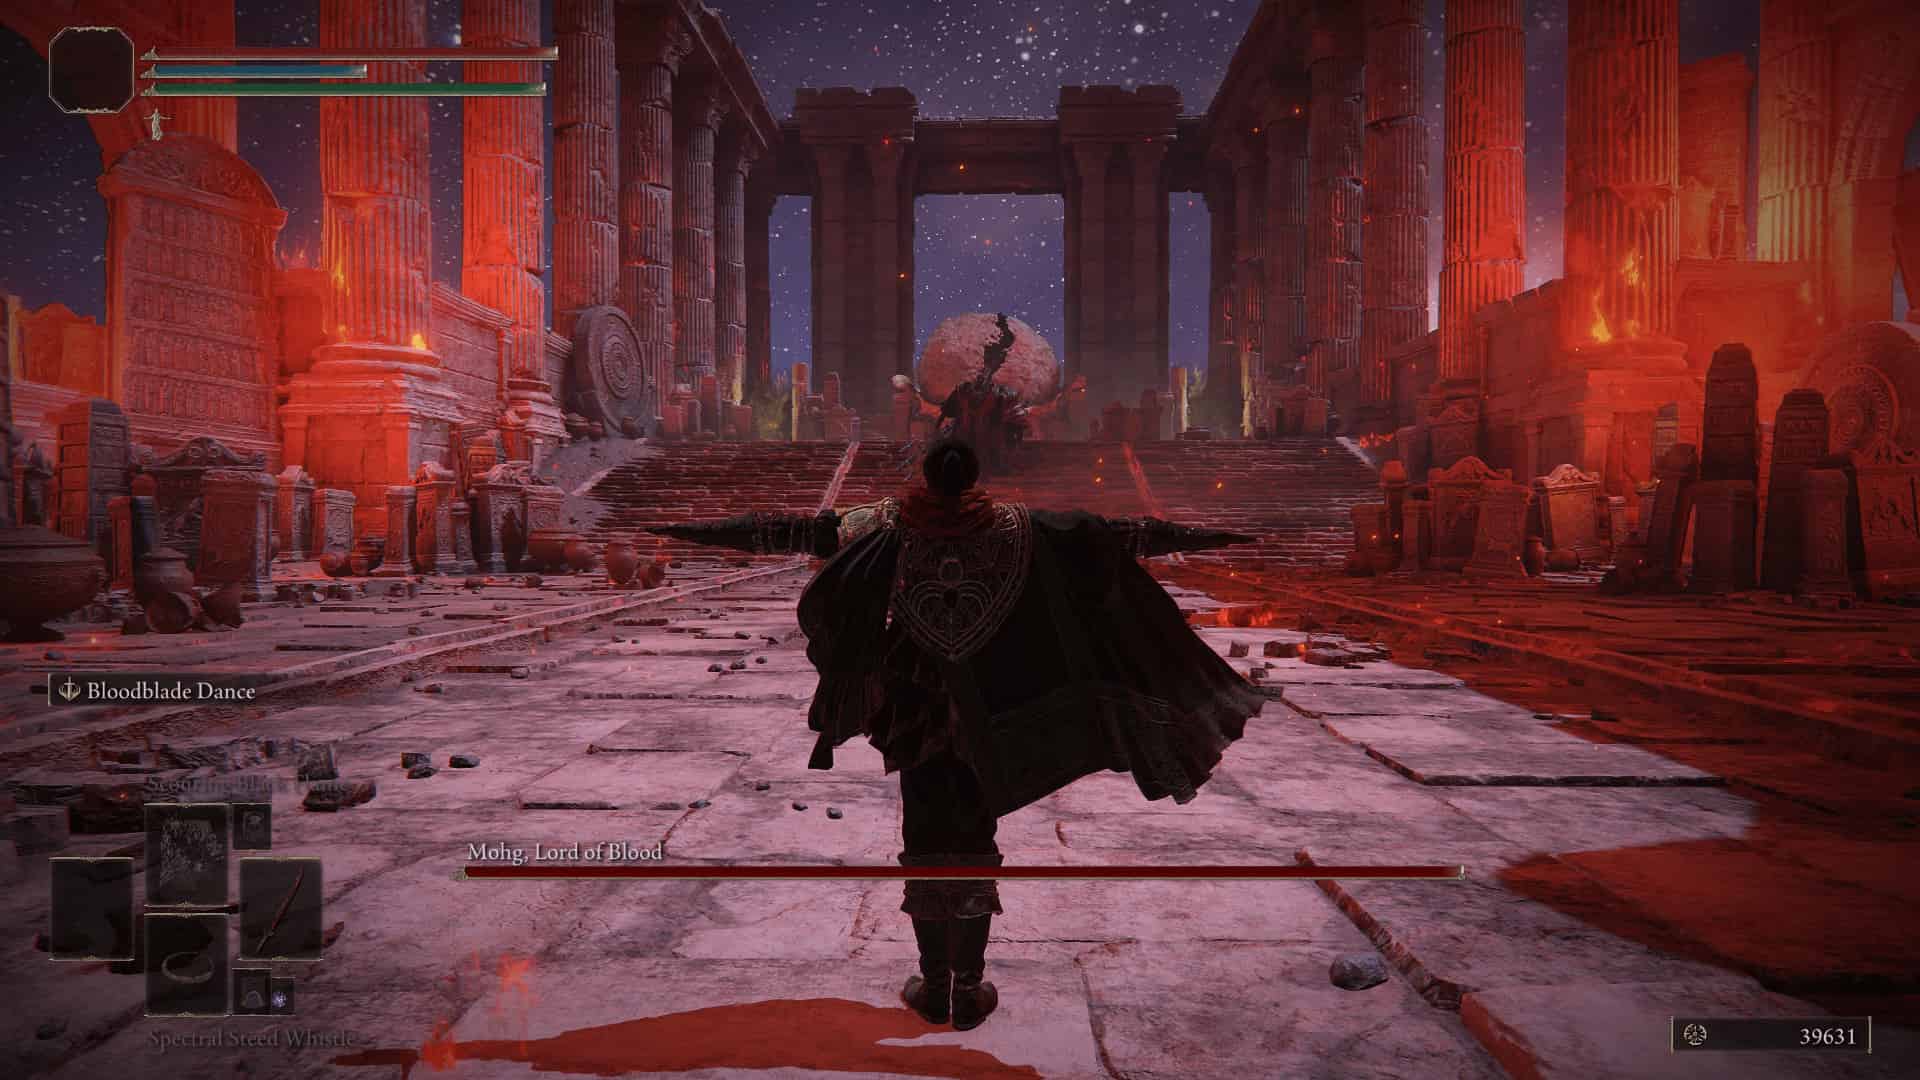 Standing in front of Mohg, Lord of Blood; boss required to beat before entering the DLC for Elden Ring.